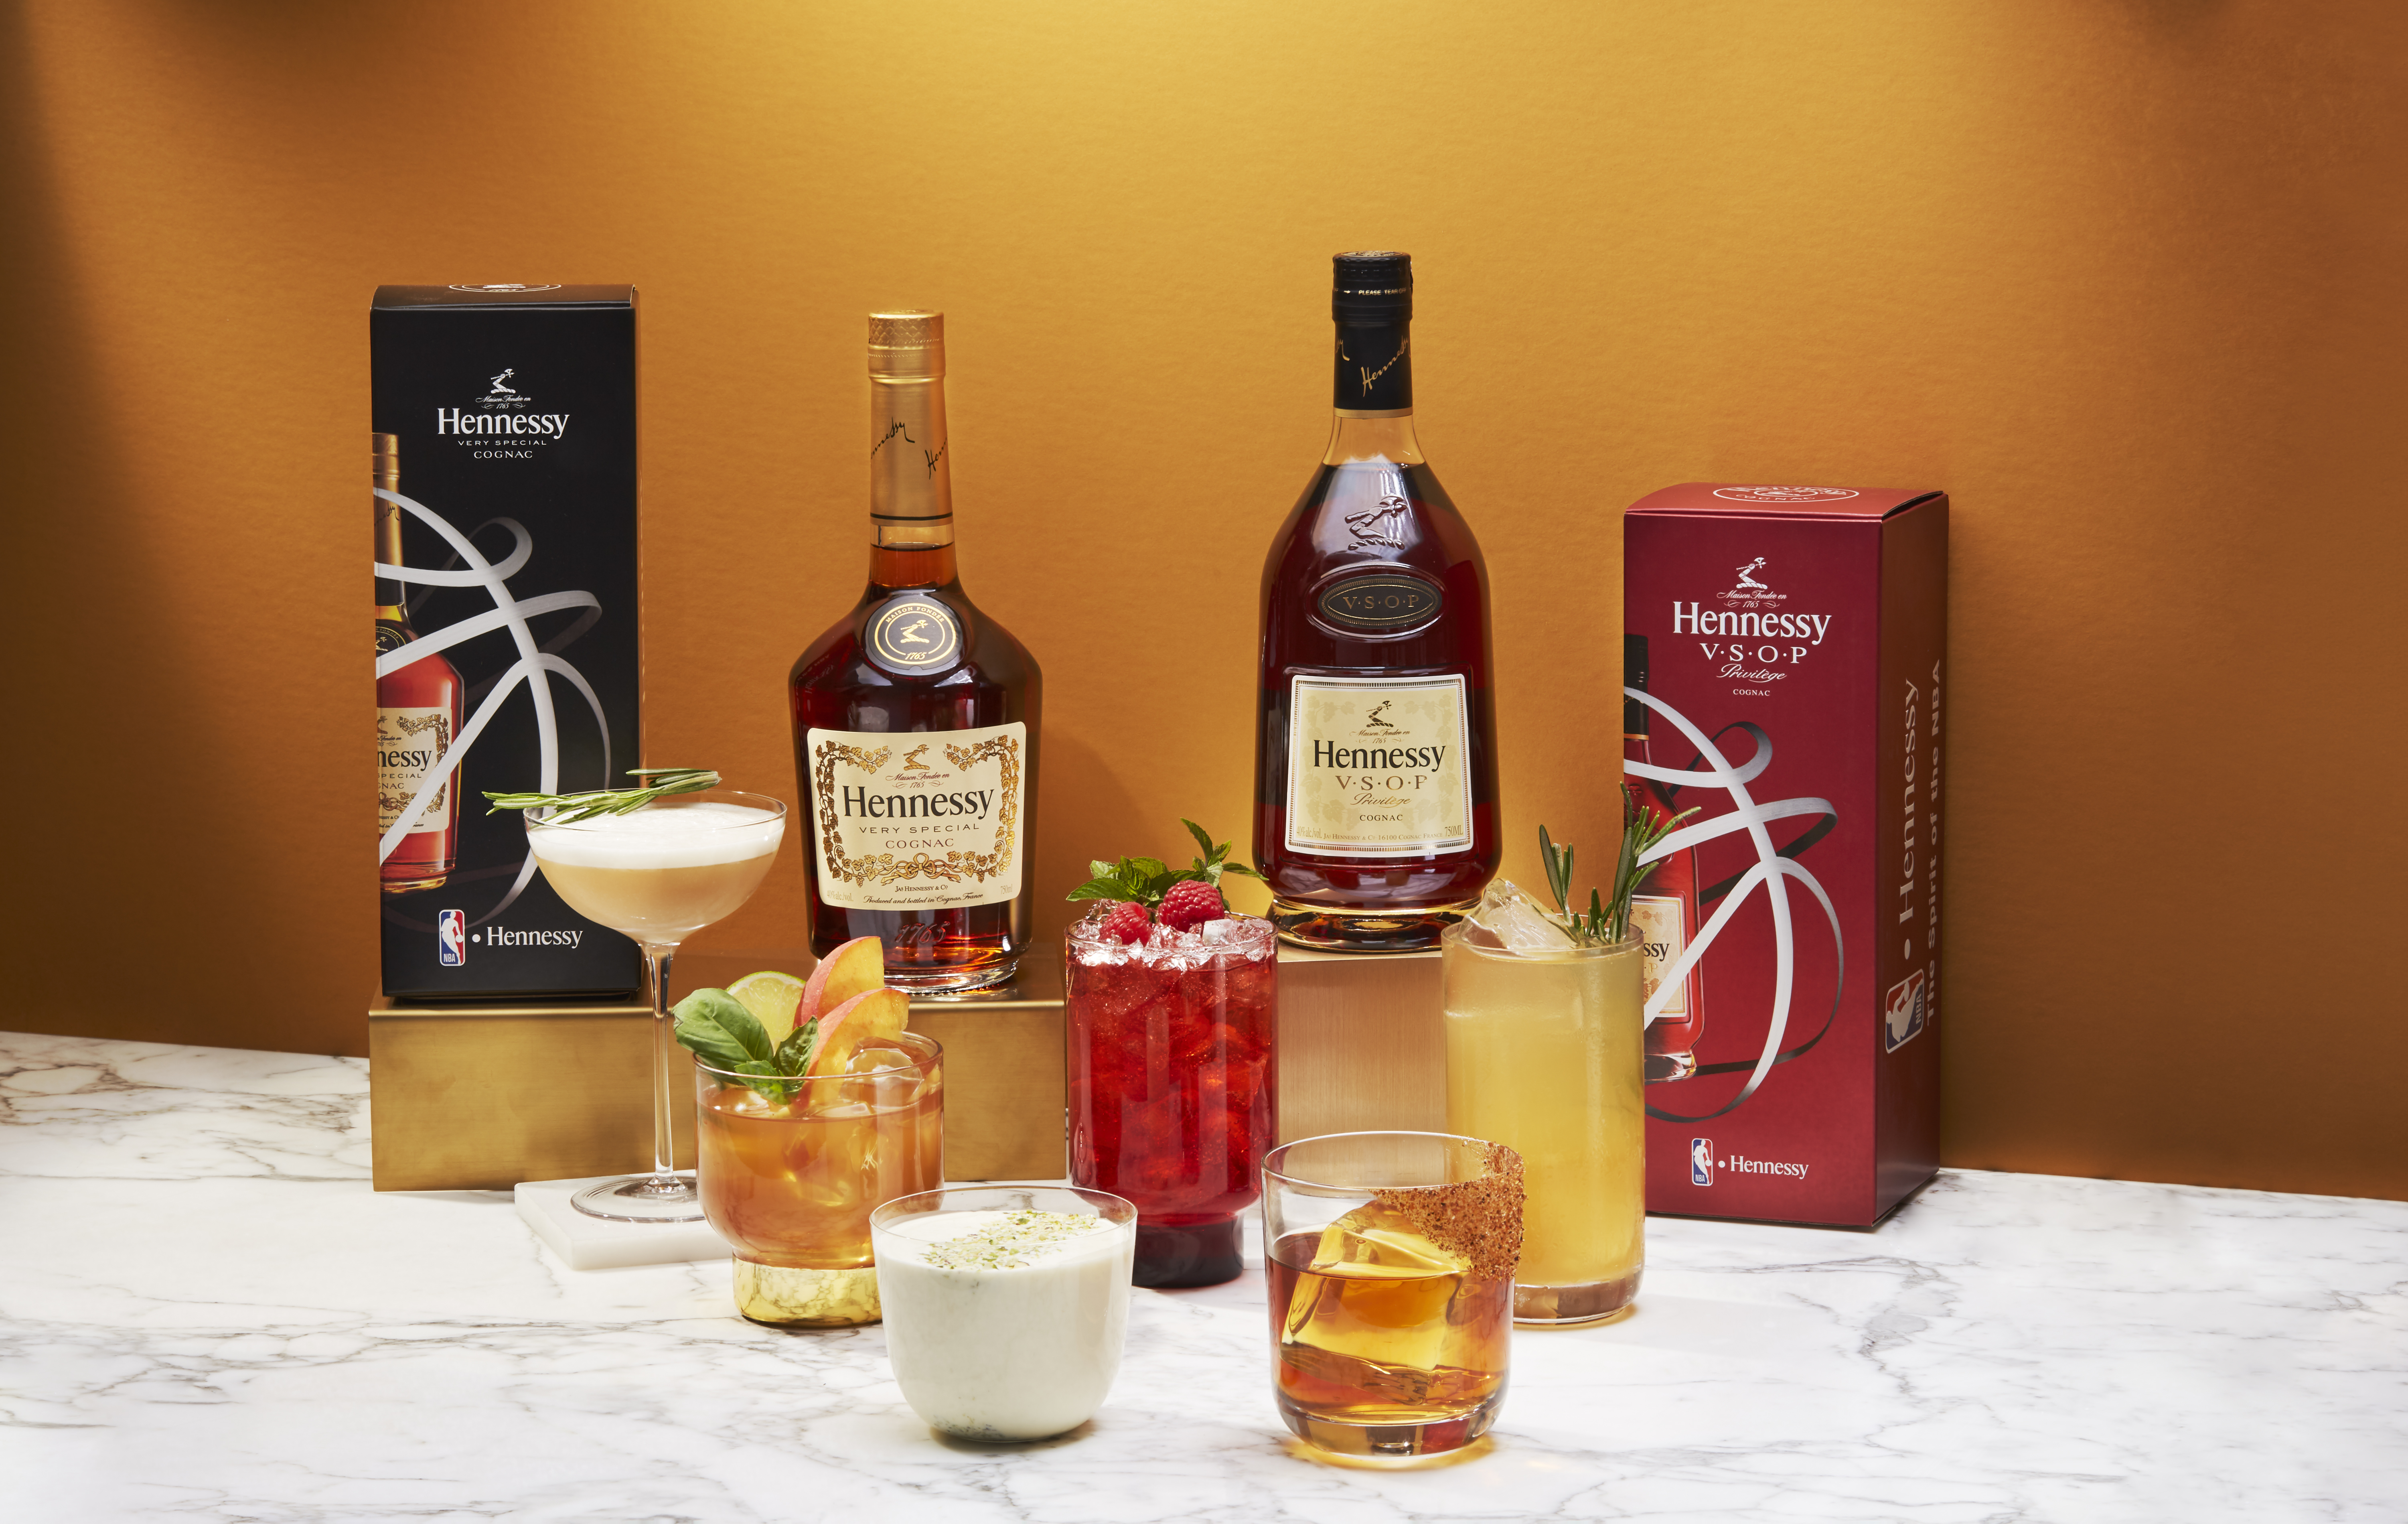 Breakthru Beverage Group Is Now the Exclusive Moët Hennessy